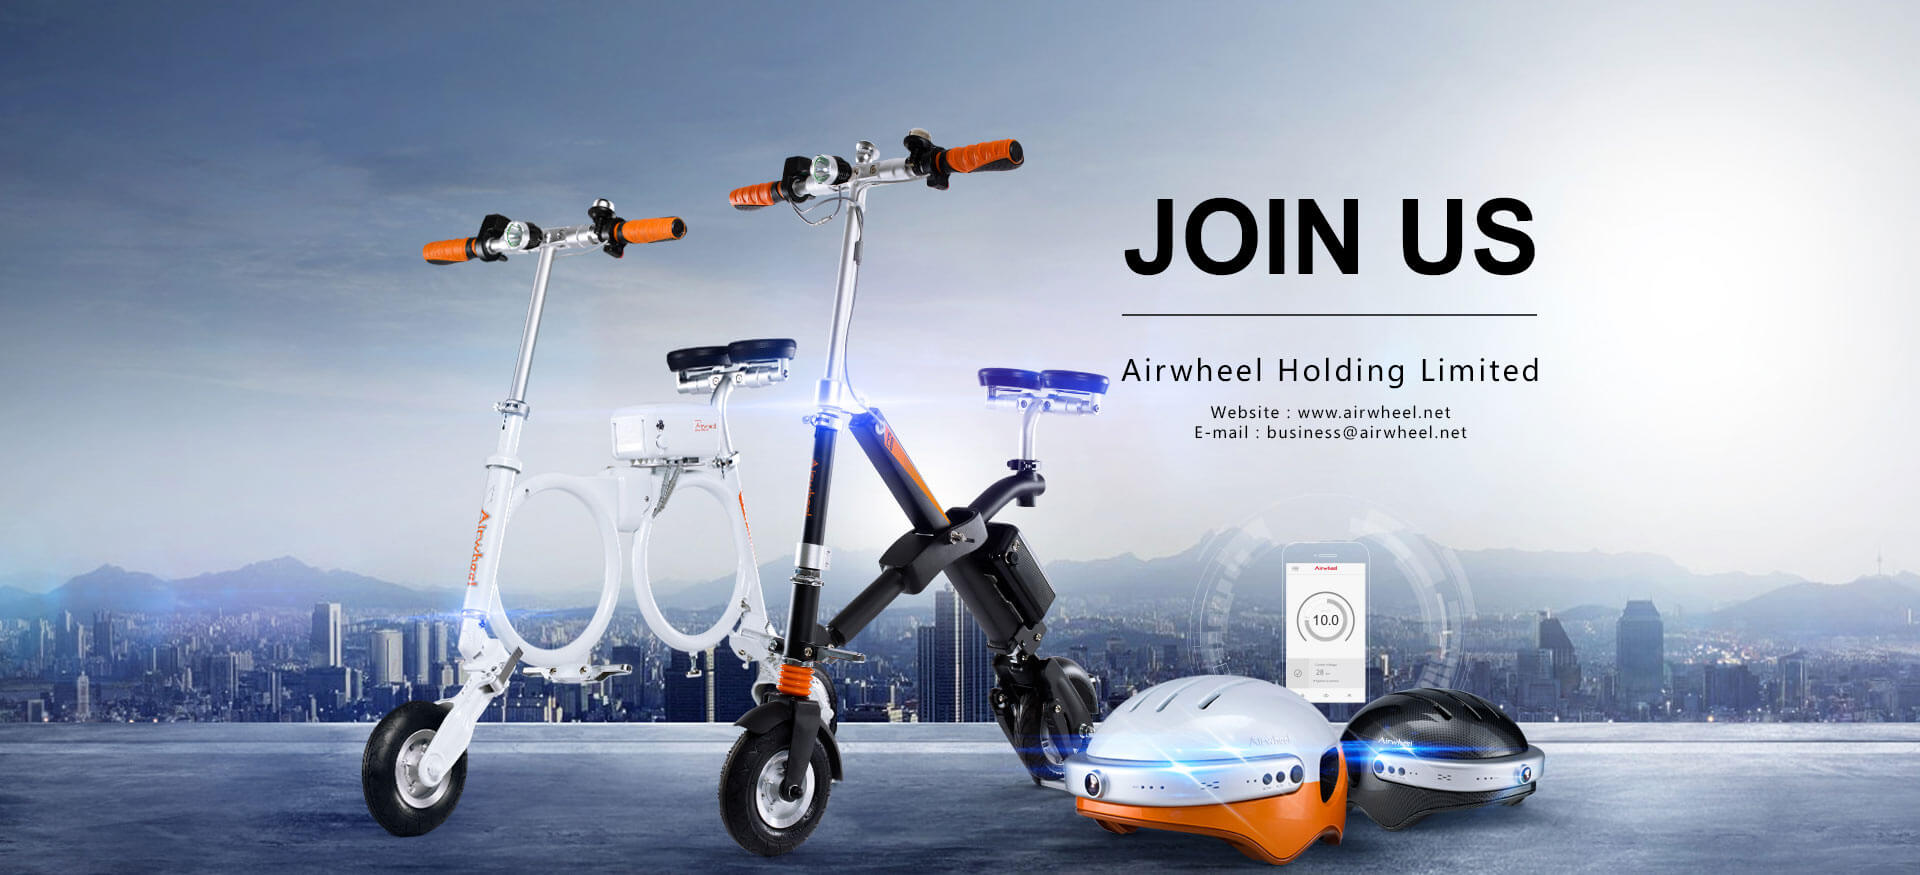 Airwheel self-balancing electric scooters